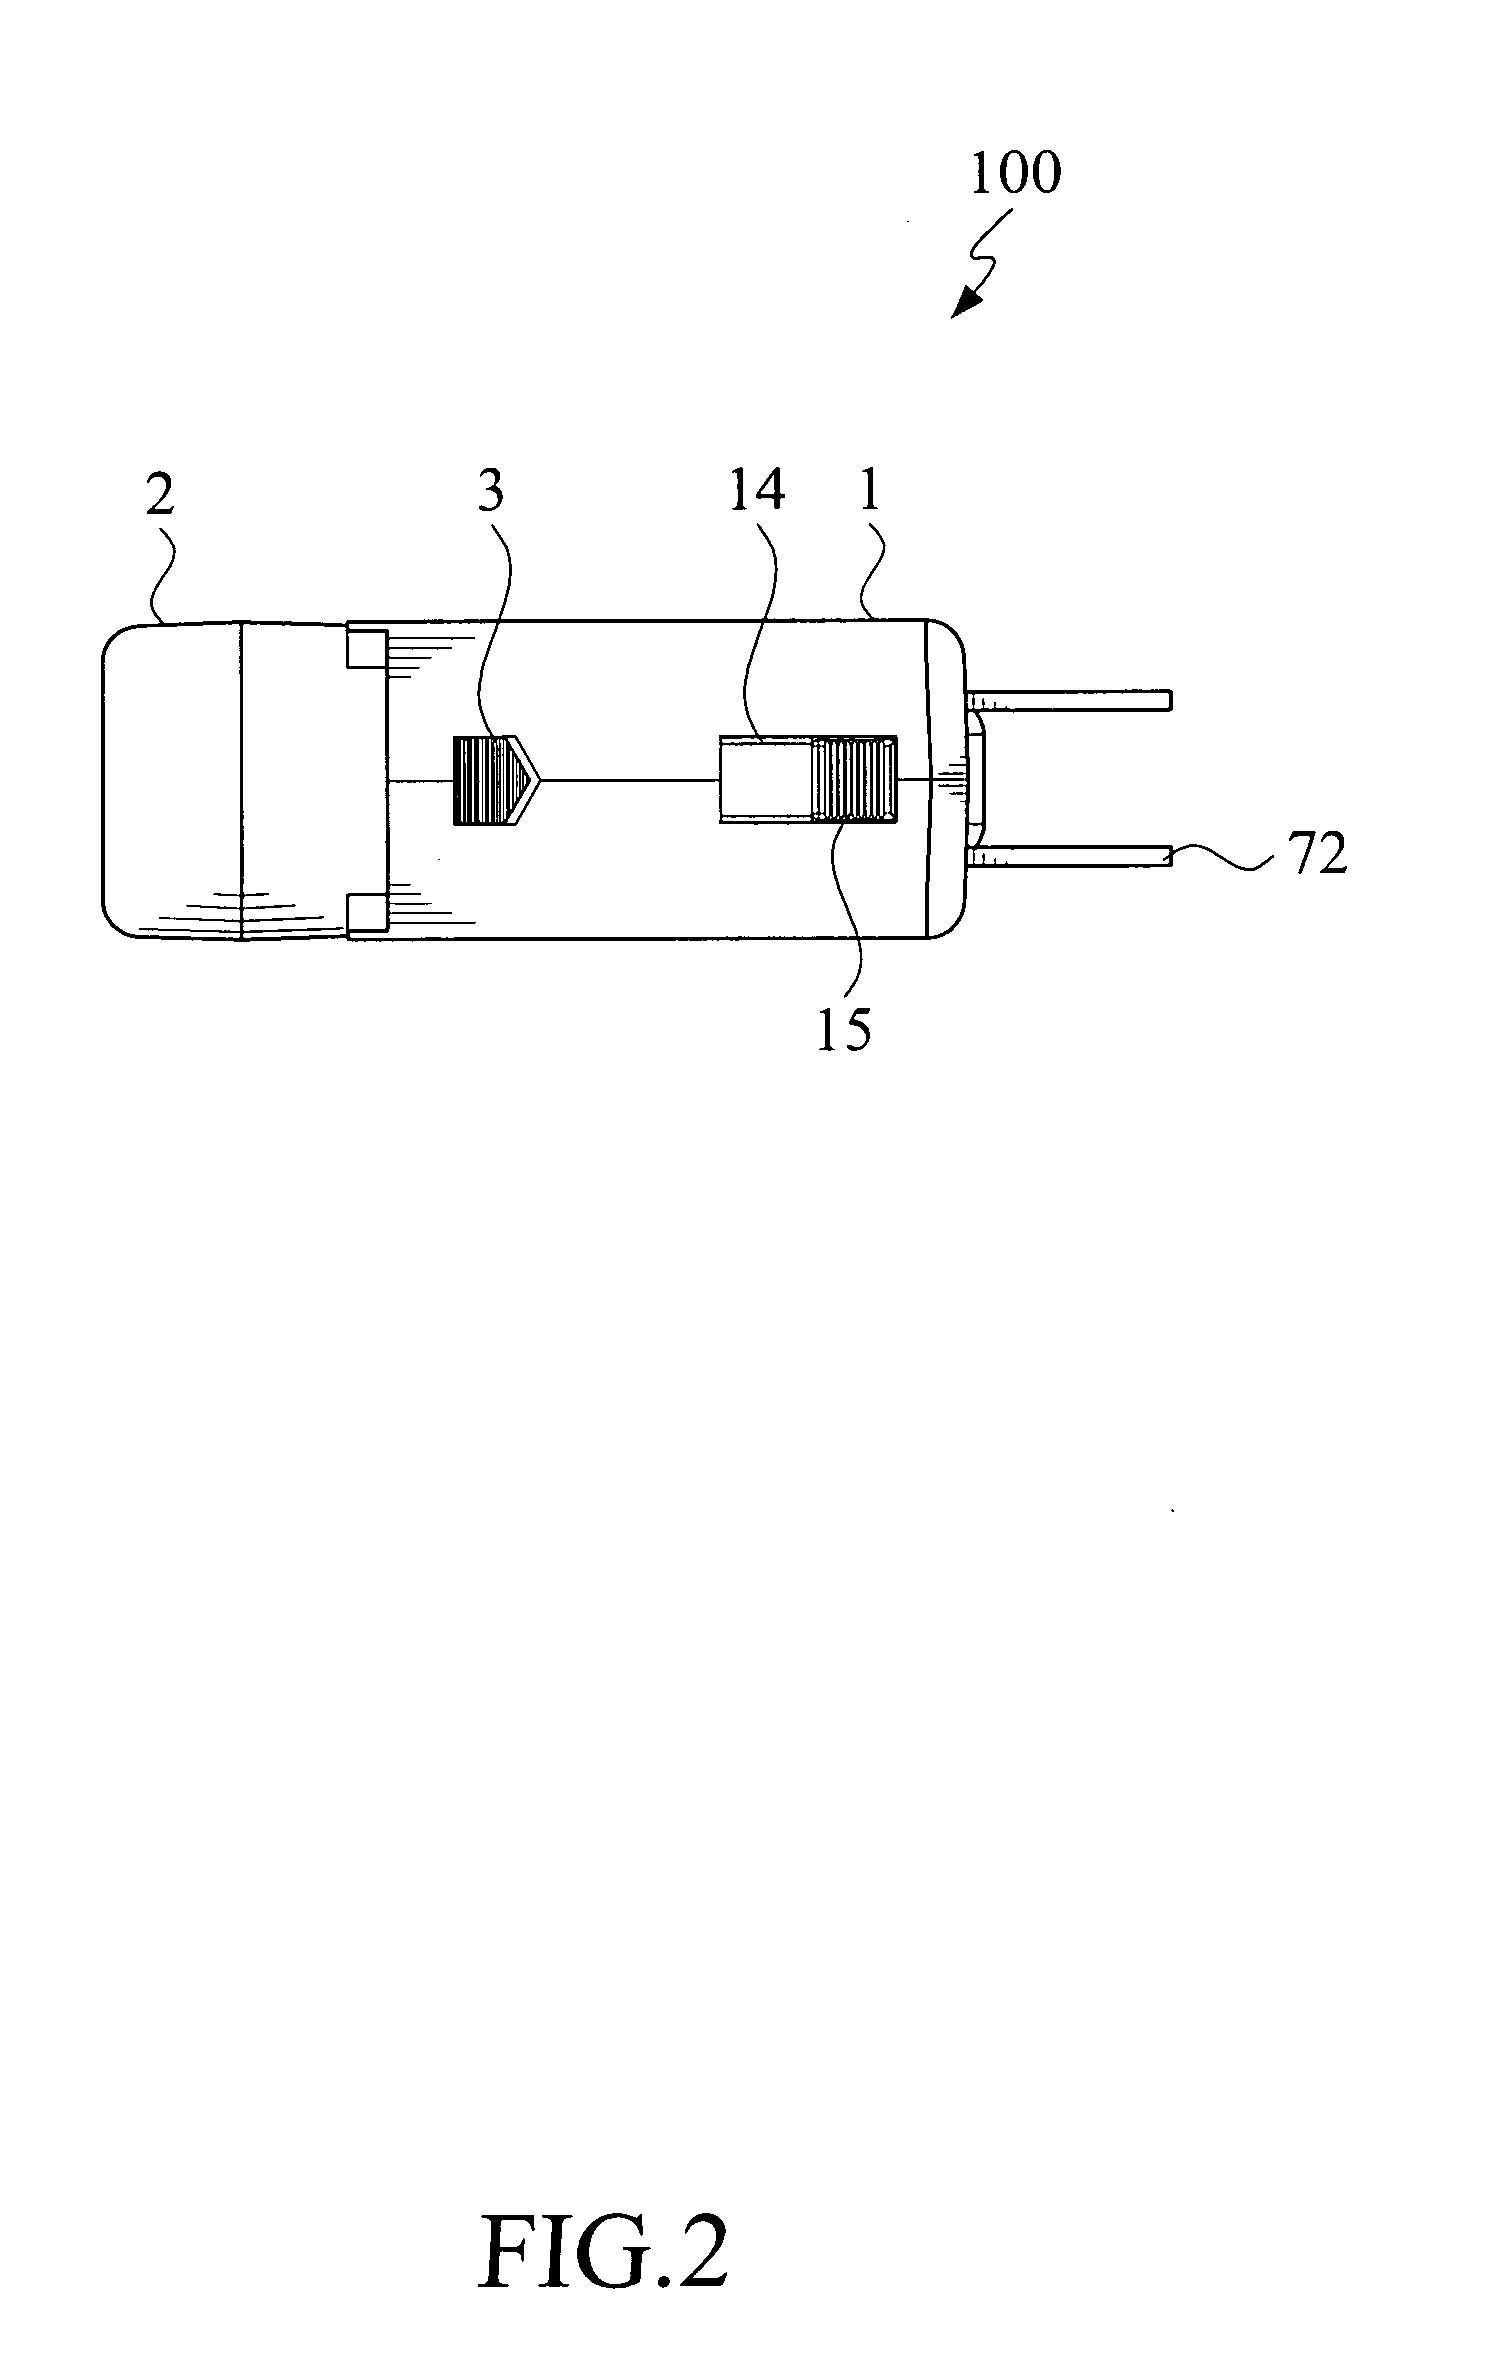 Multi-functional power storage and supply device